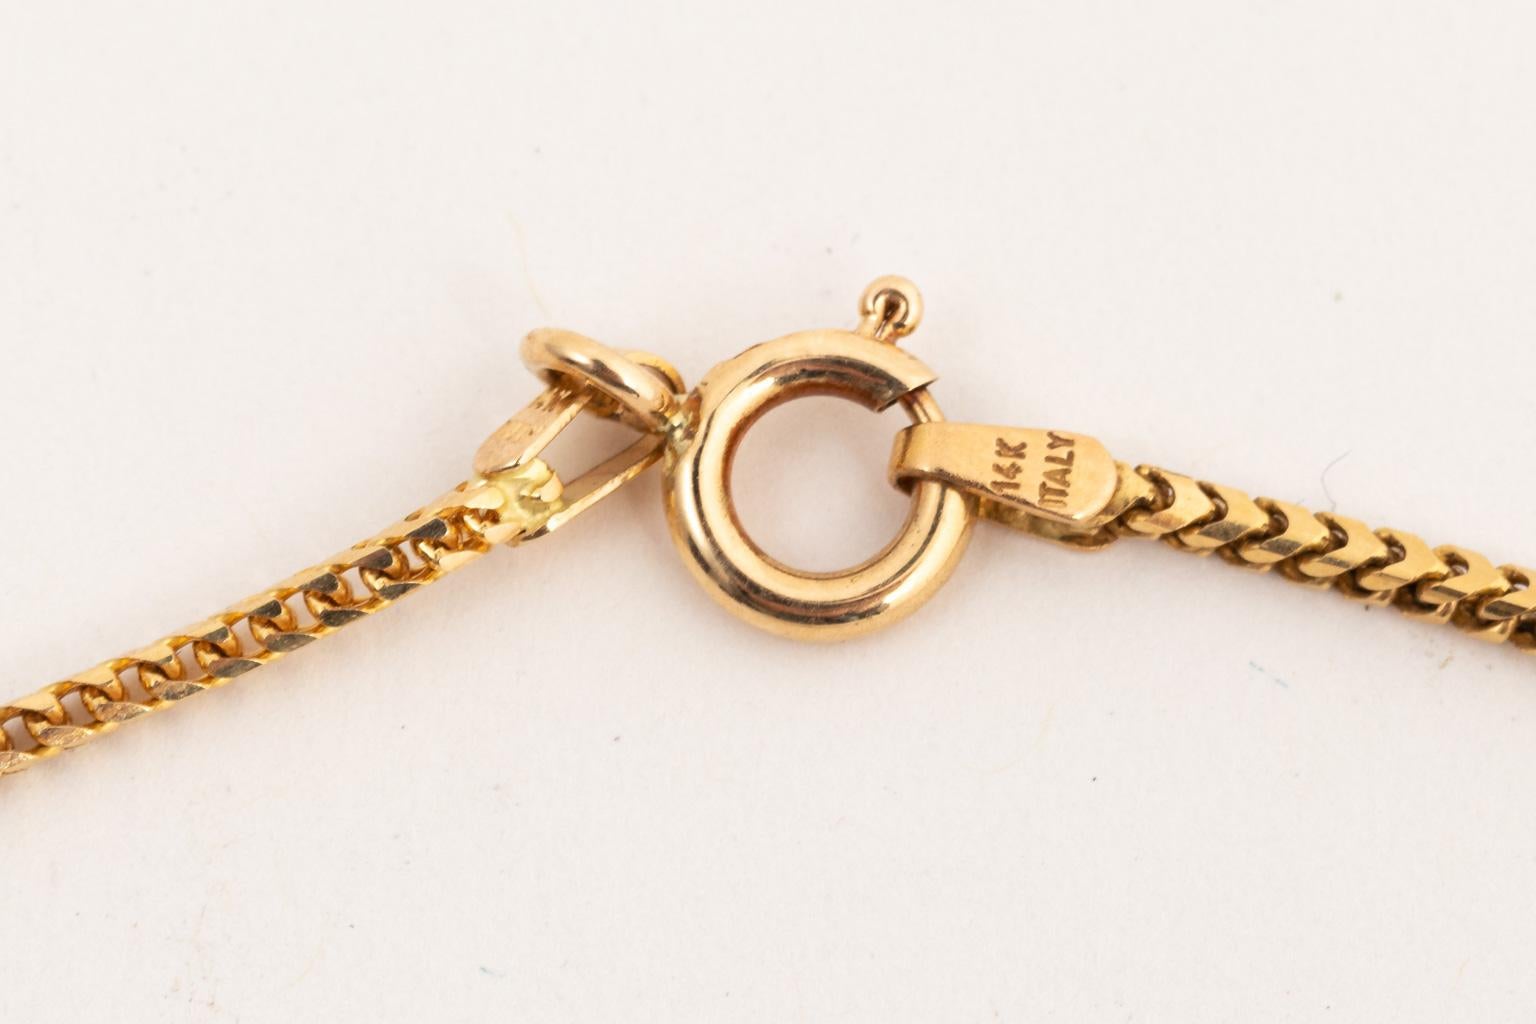 14 Karat Gold Charm and Chain Necklace In Good Condition For Sale In St.amford, CT